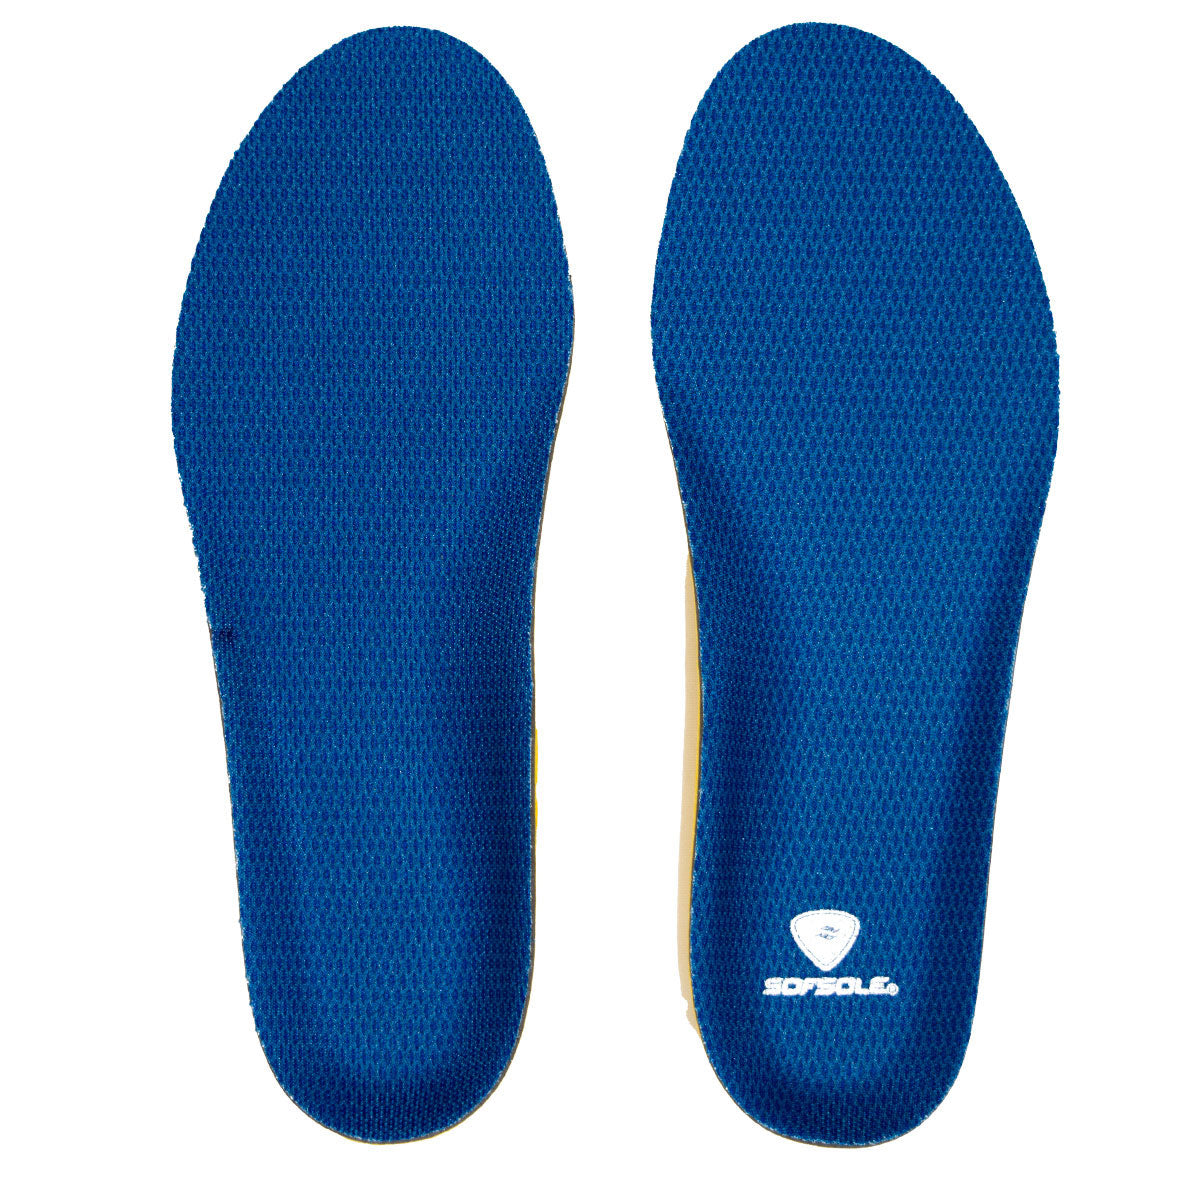 SofSole Athlete Perform Cushioned Insoles - Adult